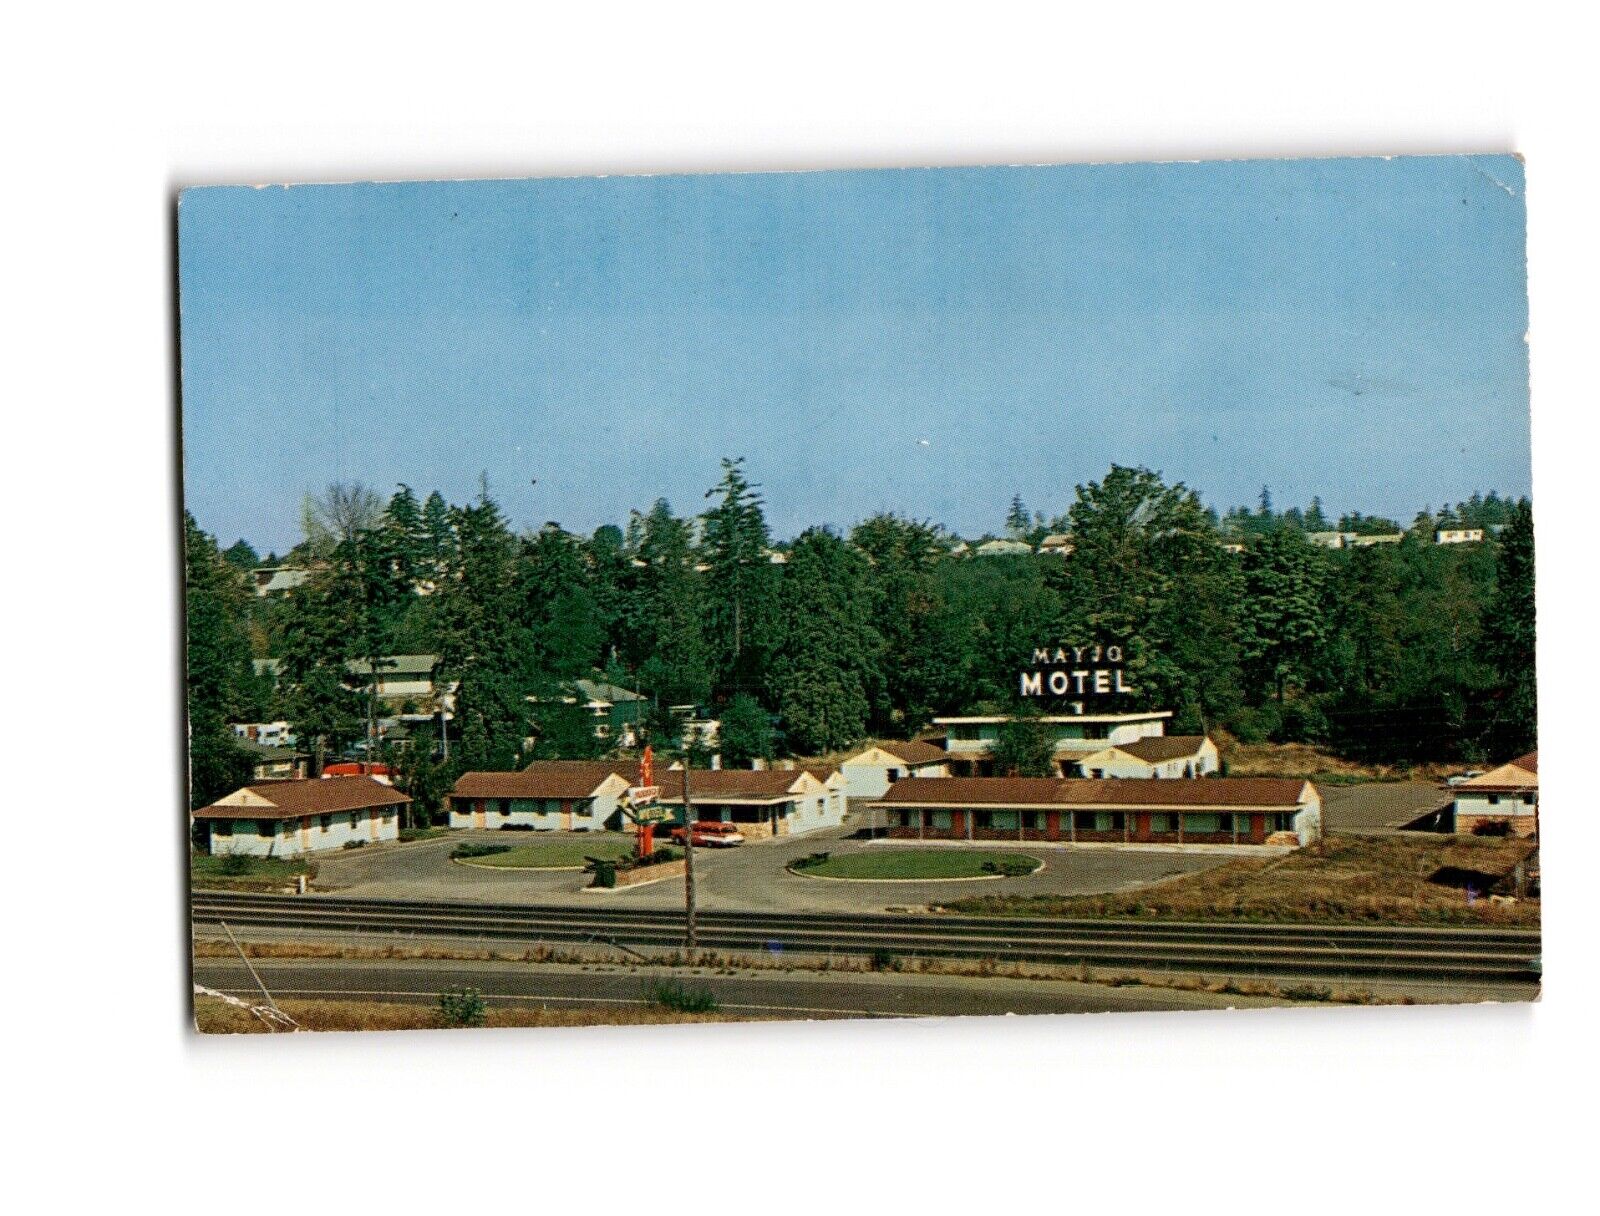 Vintage Postcard Mayo Motel Seattle-Tacoma Airport Pacific Hwy George Mood